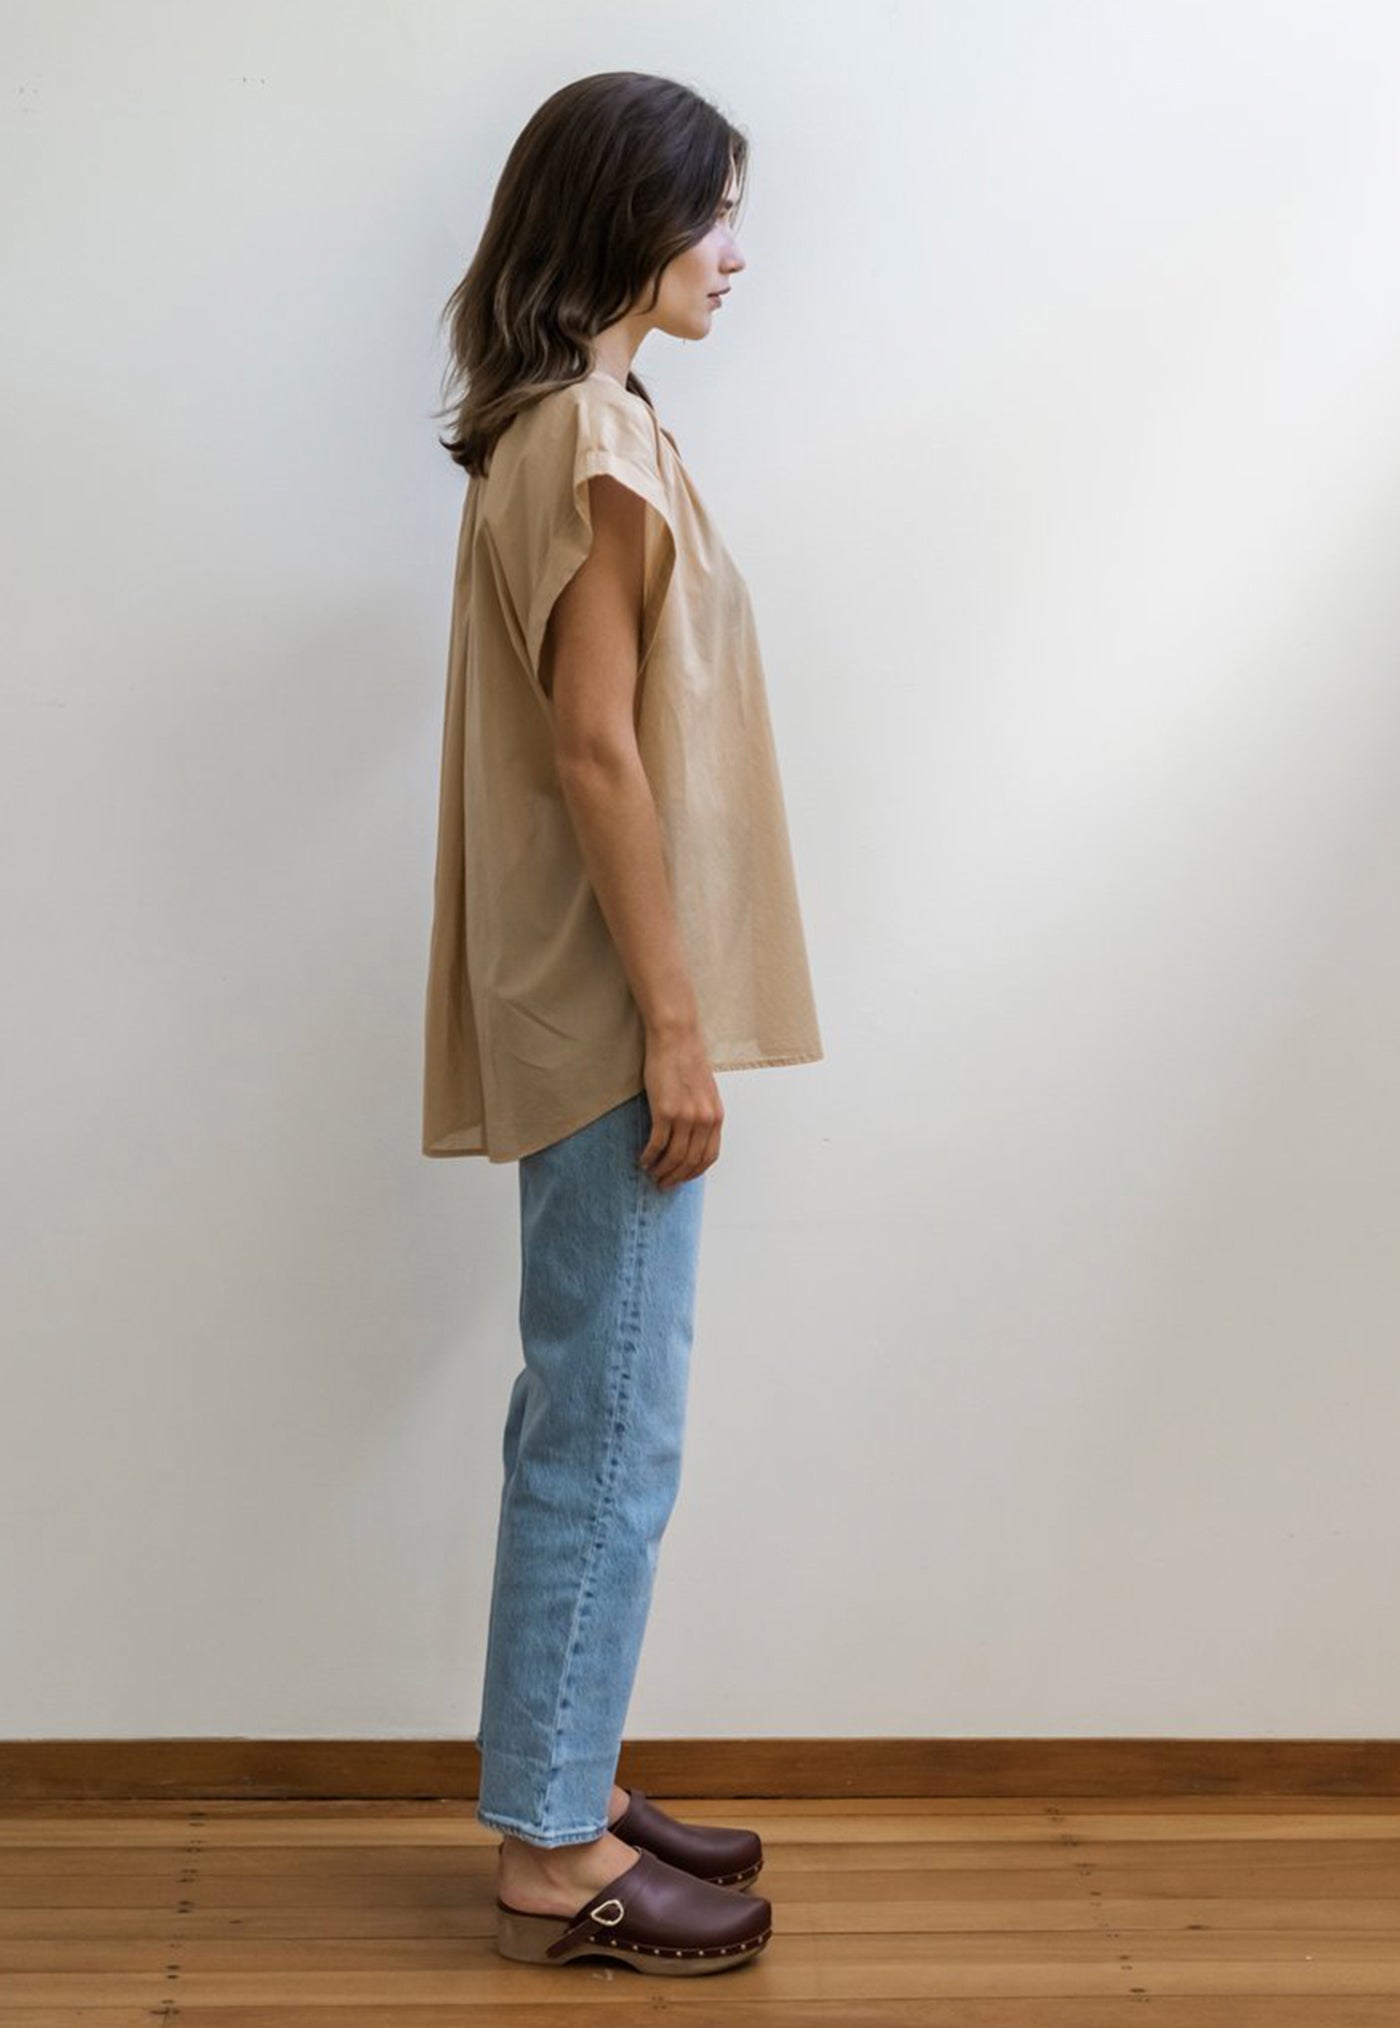 Short Sleeve Everyday Blouse - Camel Cotton Voile sold by Angel Divine